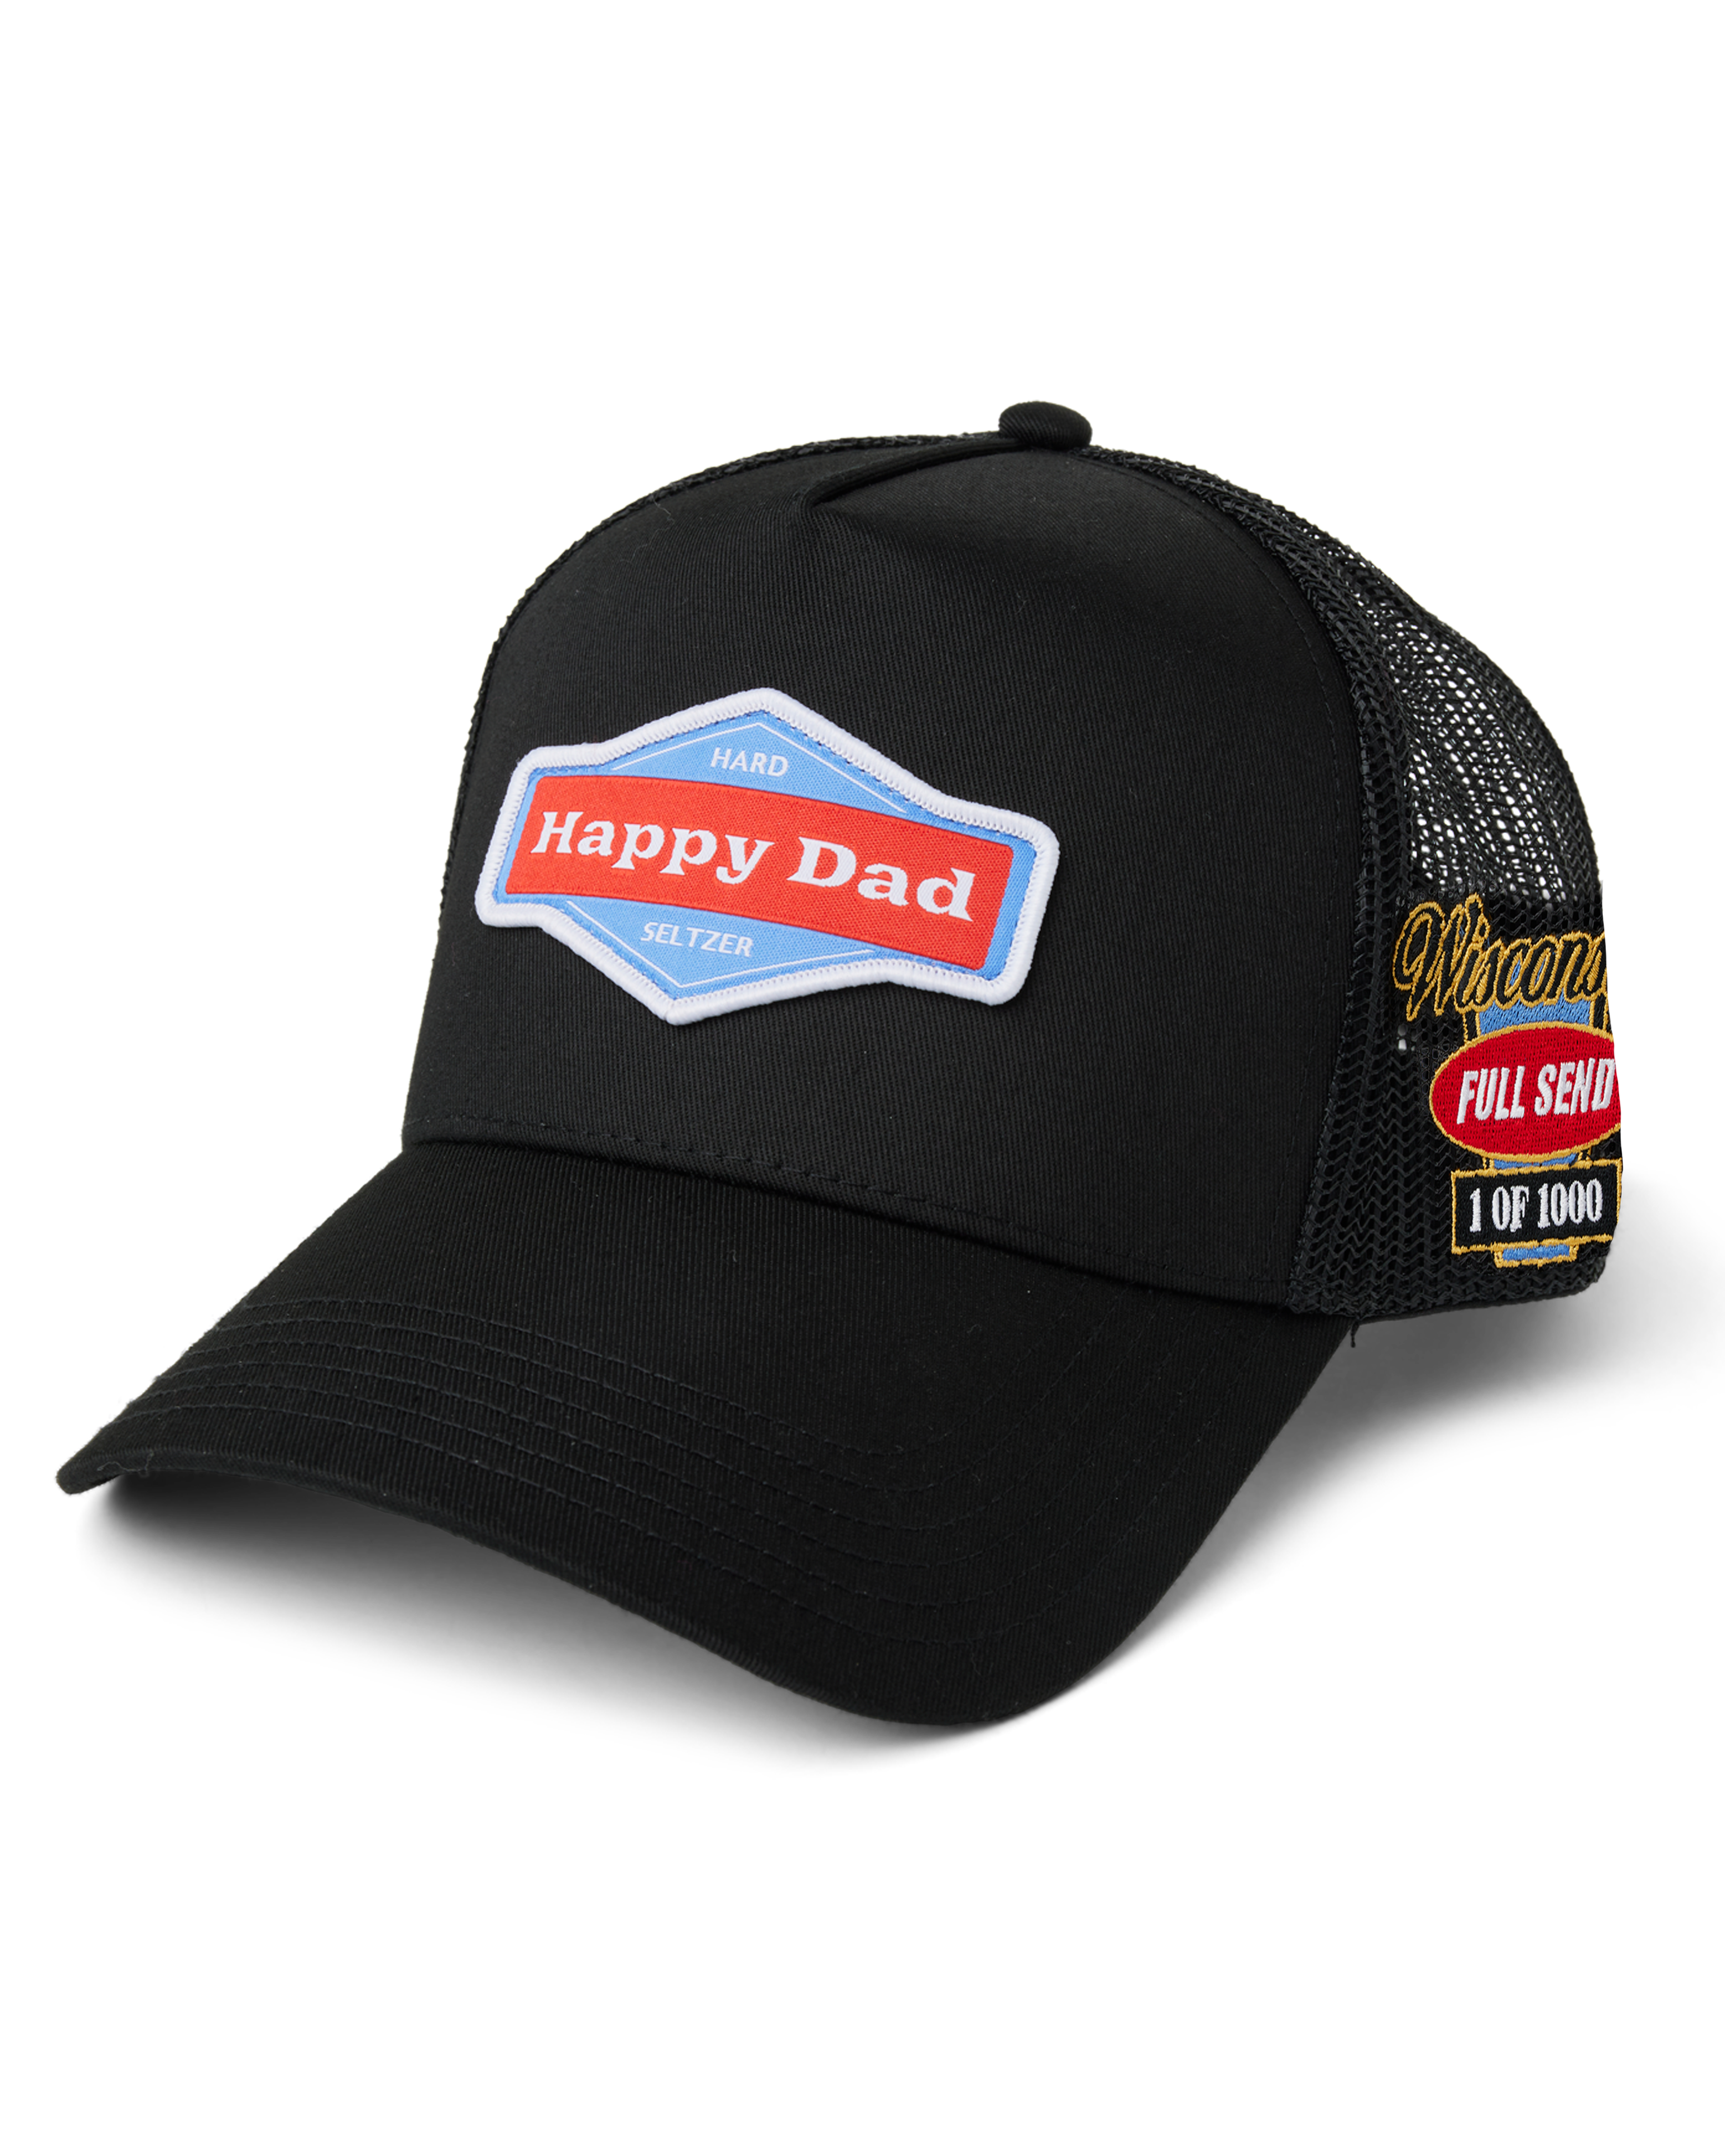 (Limited) Wisconsin - Happy Dad State Trucker Hat 1 of 1000